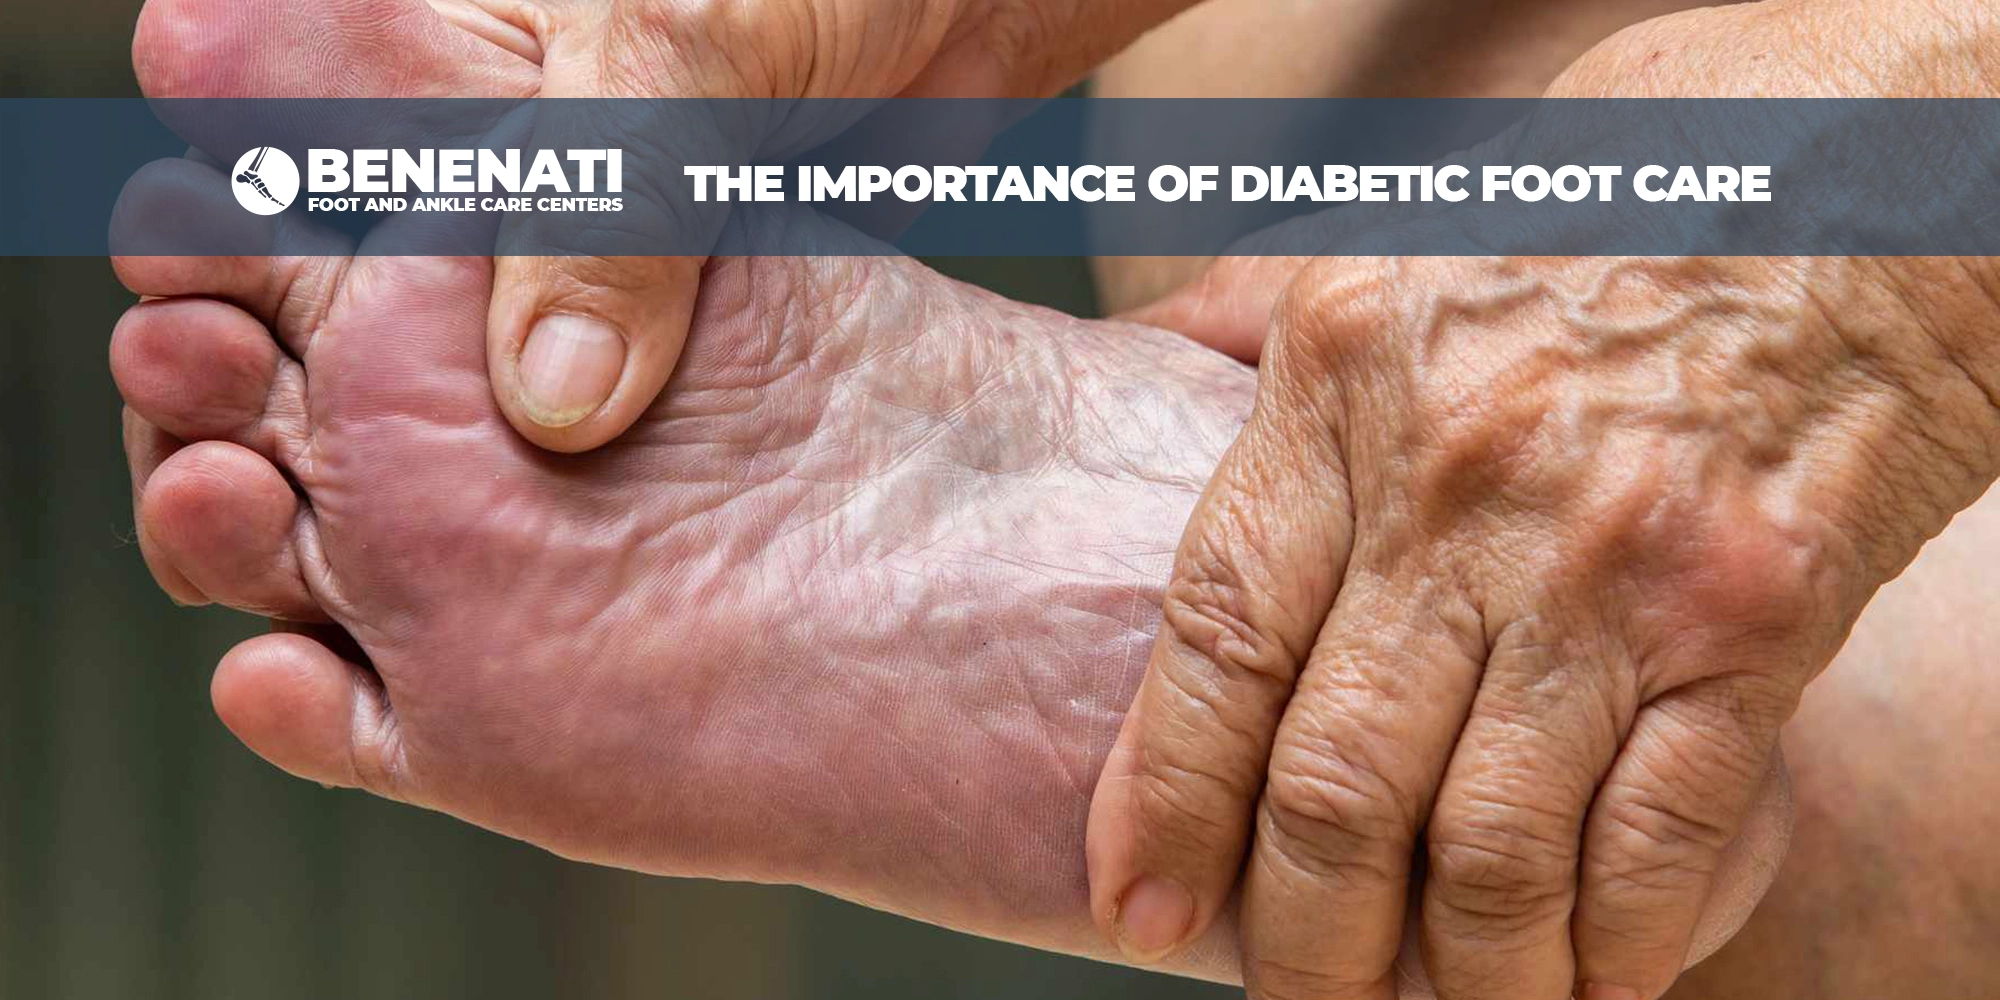 The Importance of Diabetic Foot Care in Macomb, St. Clair Shores and Warren Michigan.